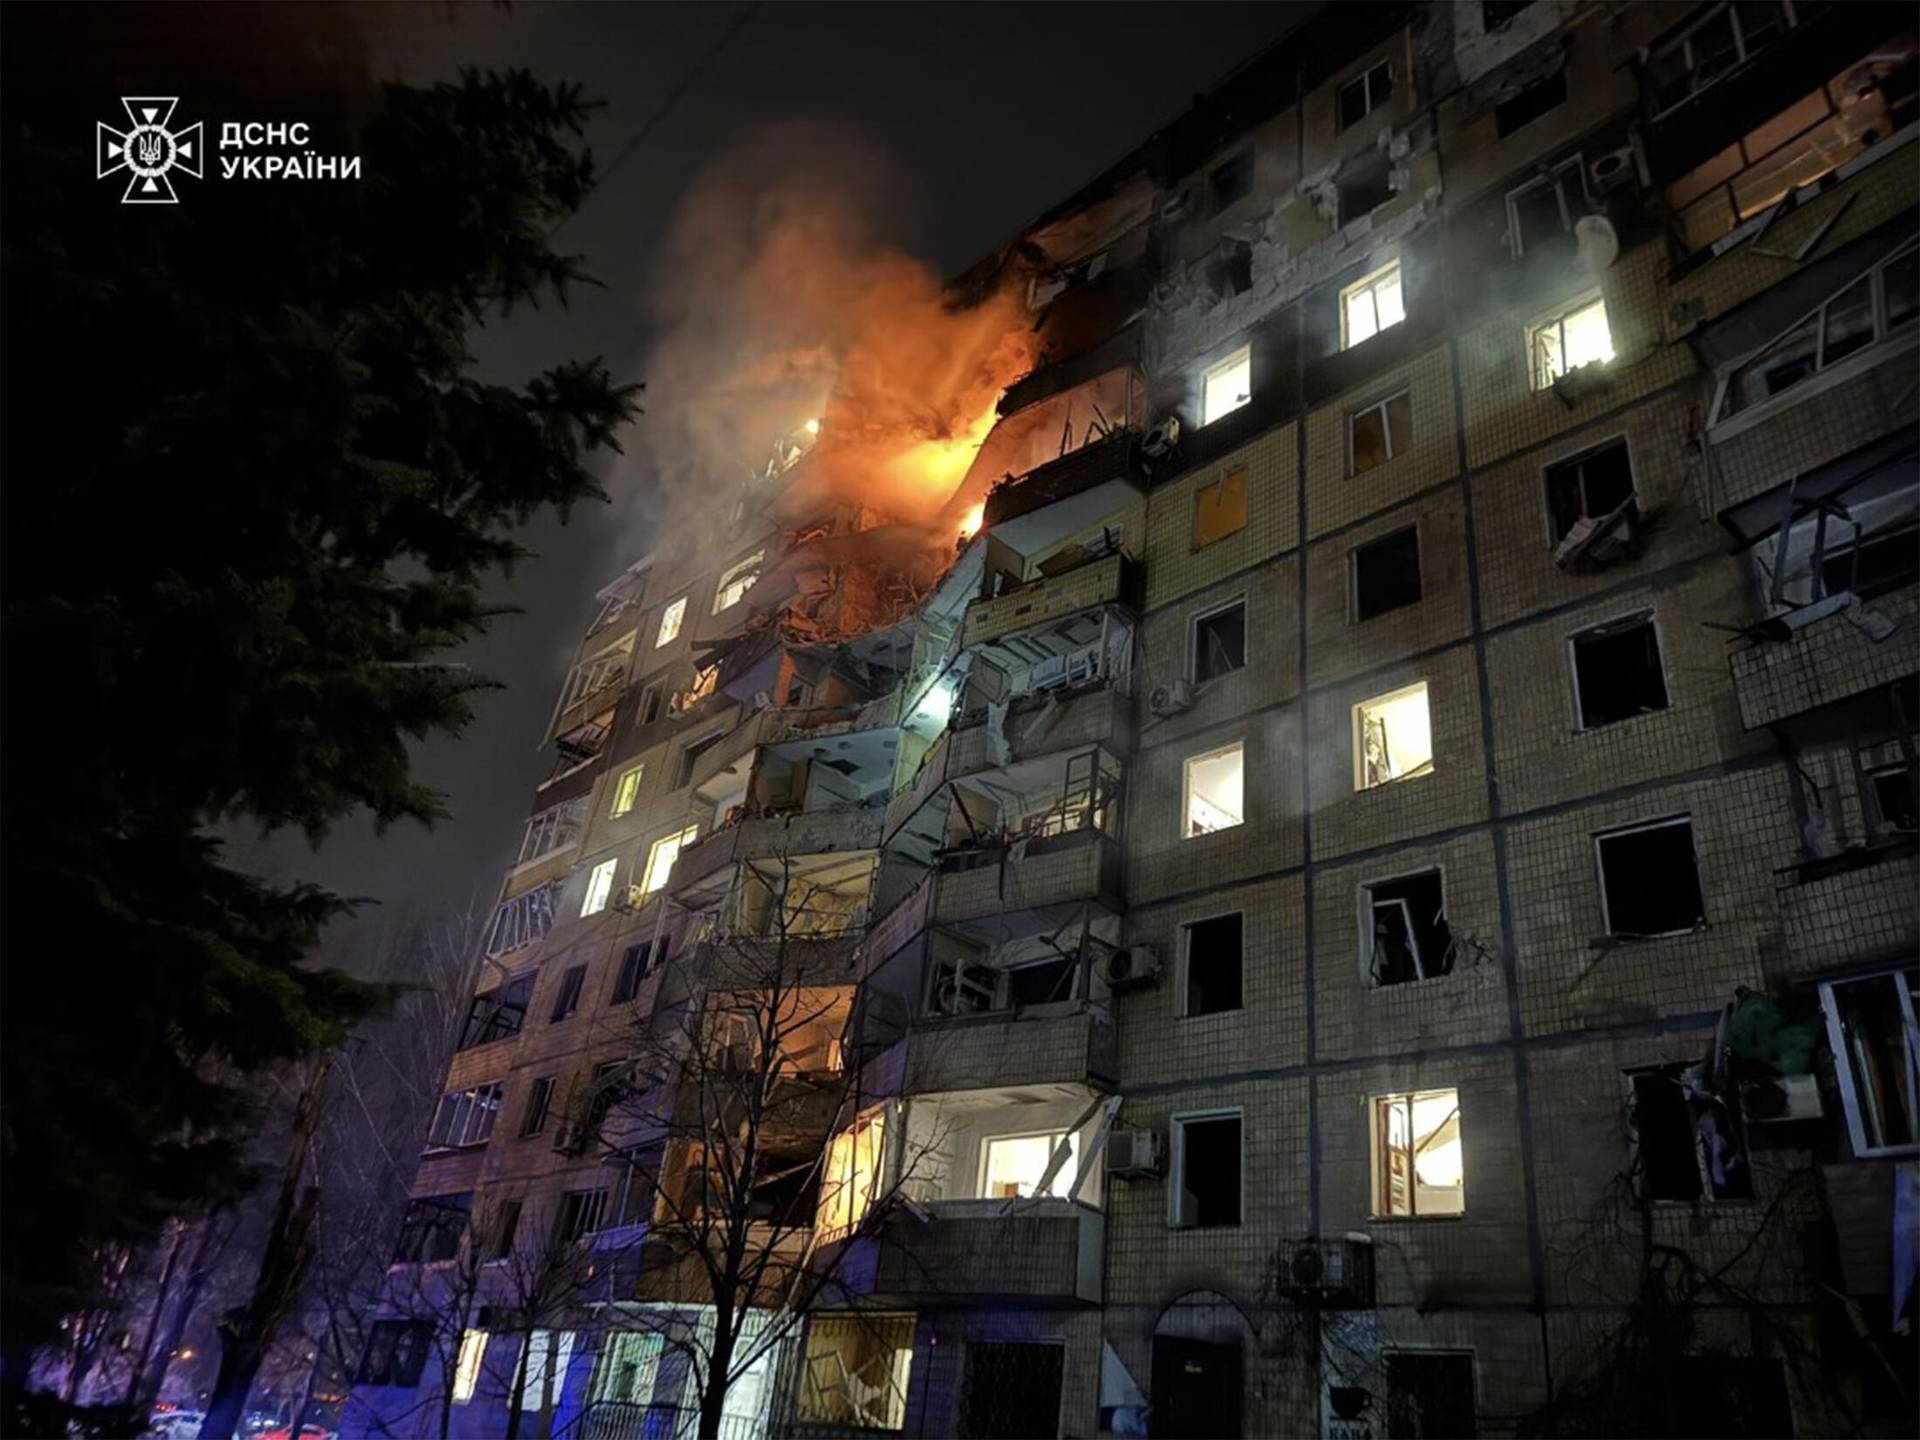 A Russian missile slammed into two apartment buildings in Kryviy Rih